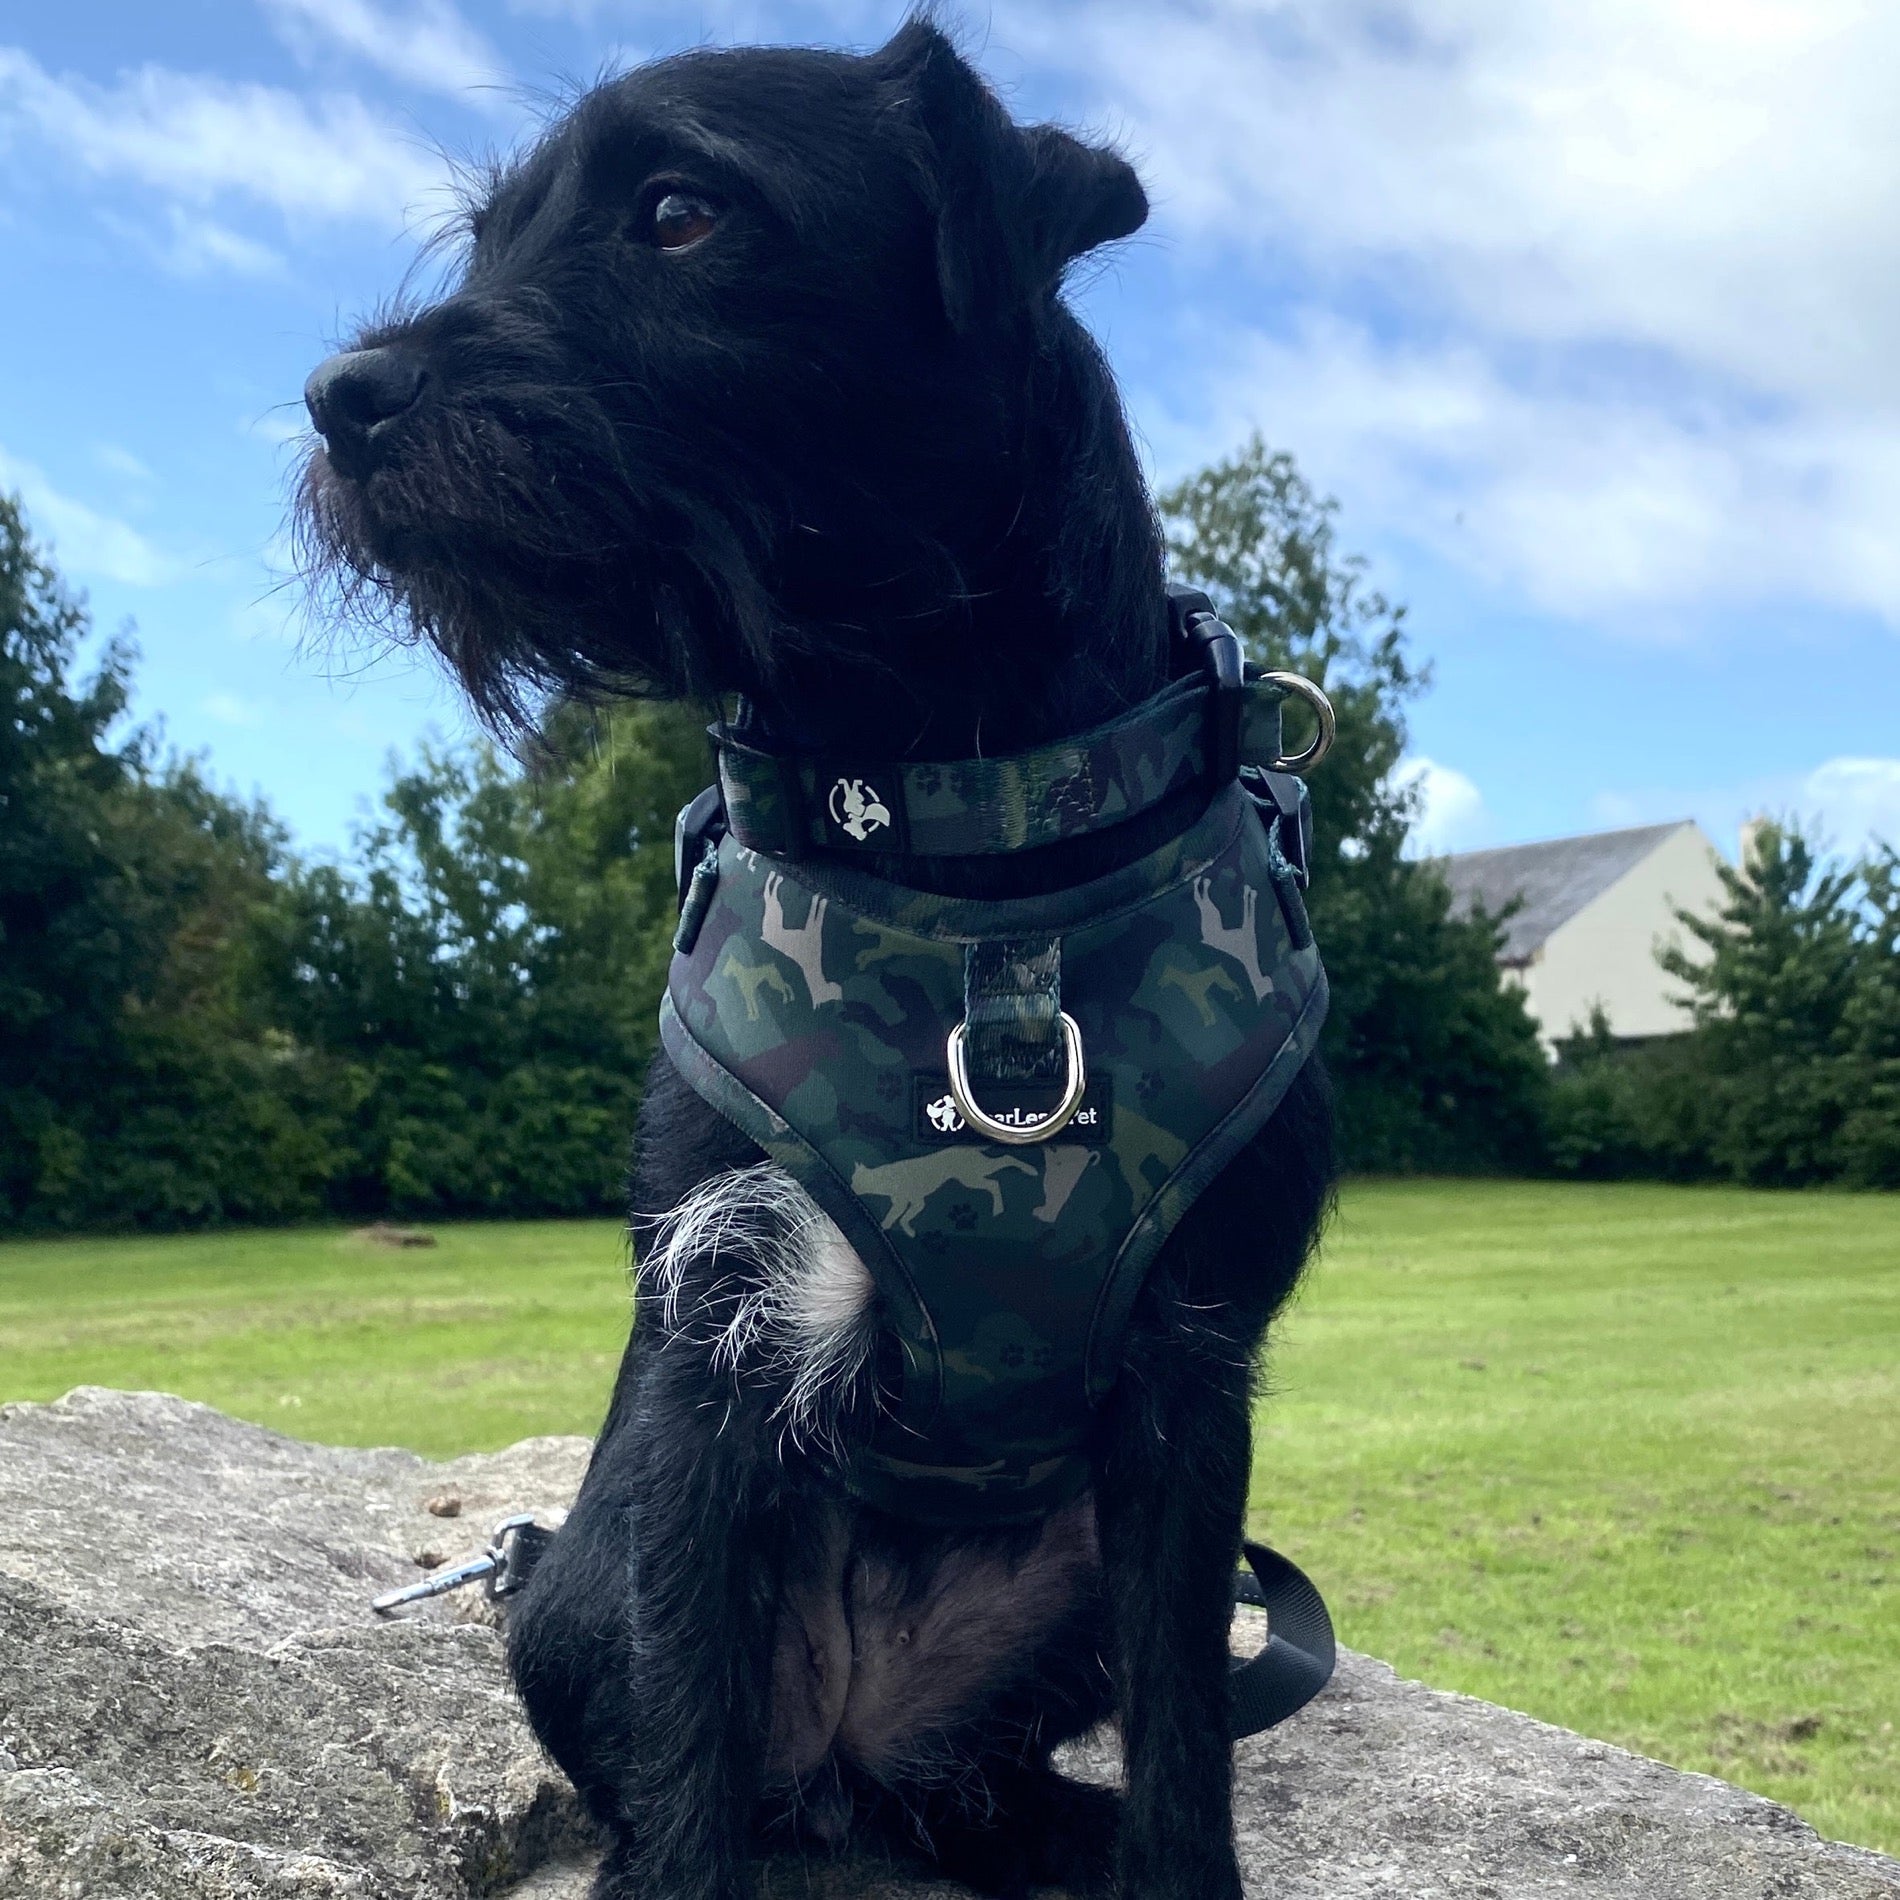 a photo of a black dog wearing a green camouflage collar and matching small dog harness sitting on a rock with grass and blue sky with clouds in the background